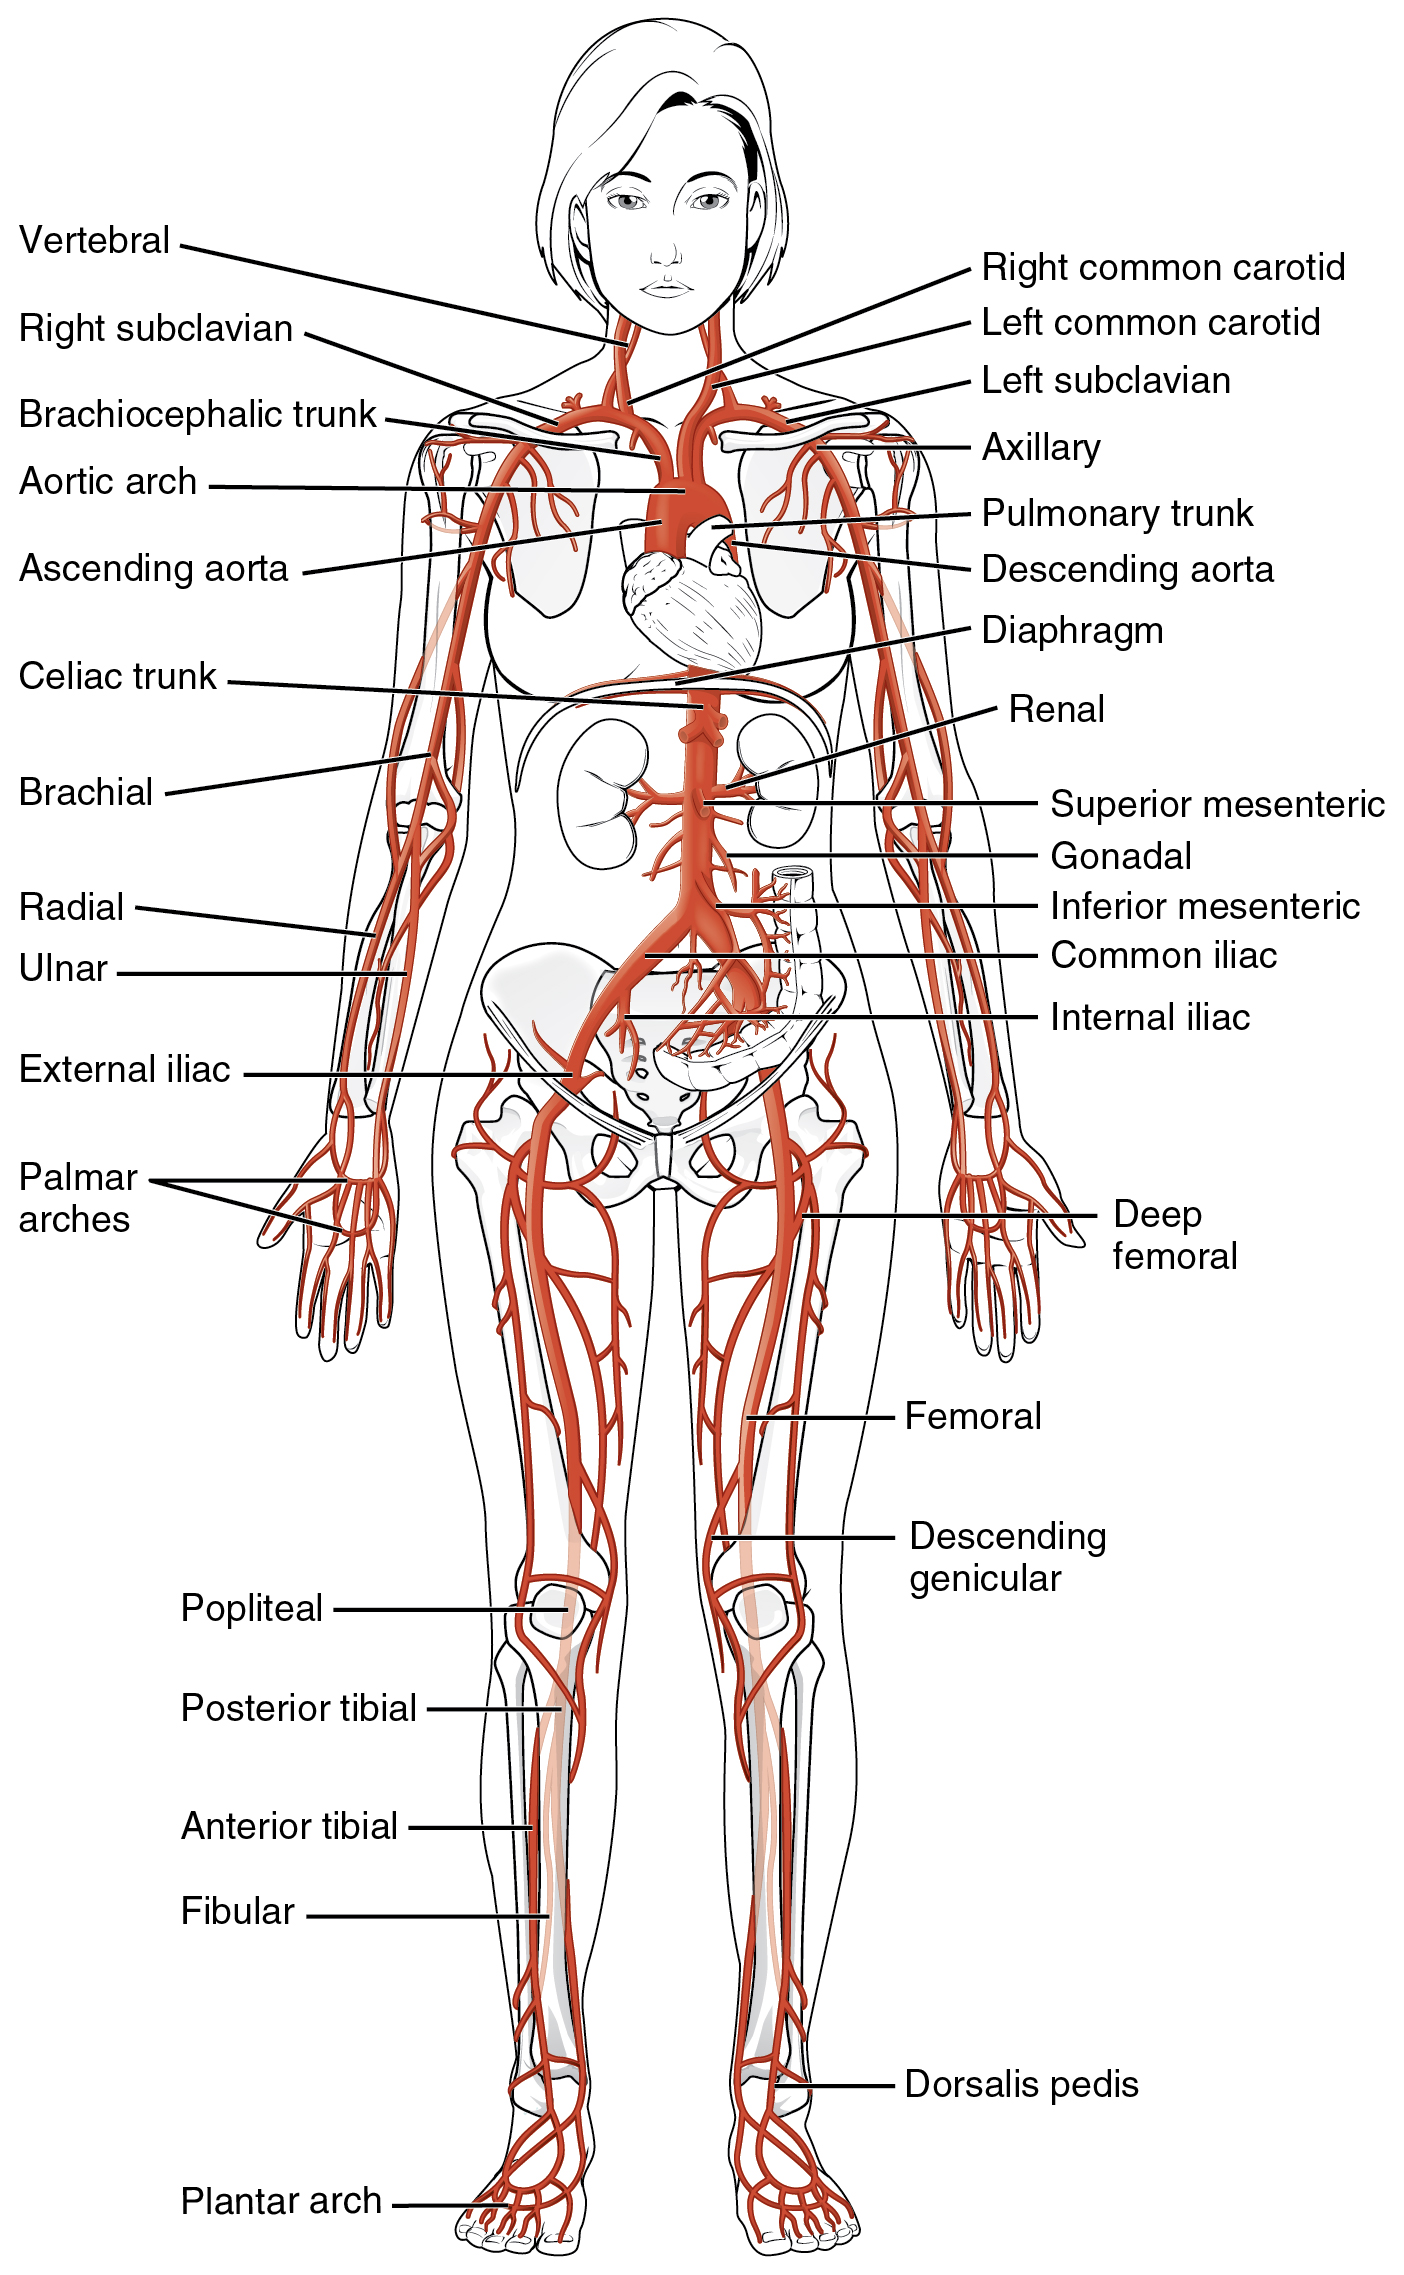 The major arteries in the human body. Image description available.